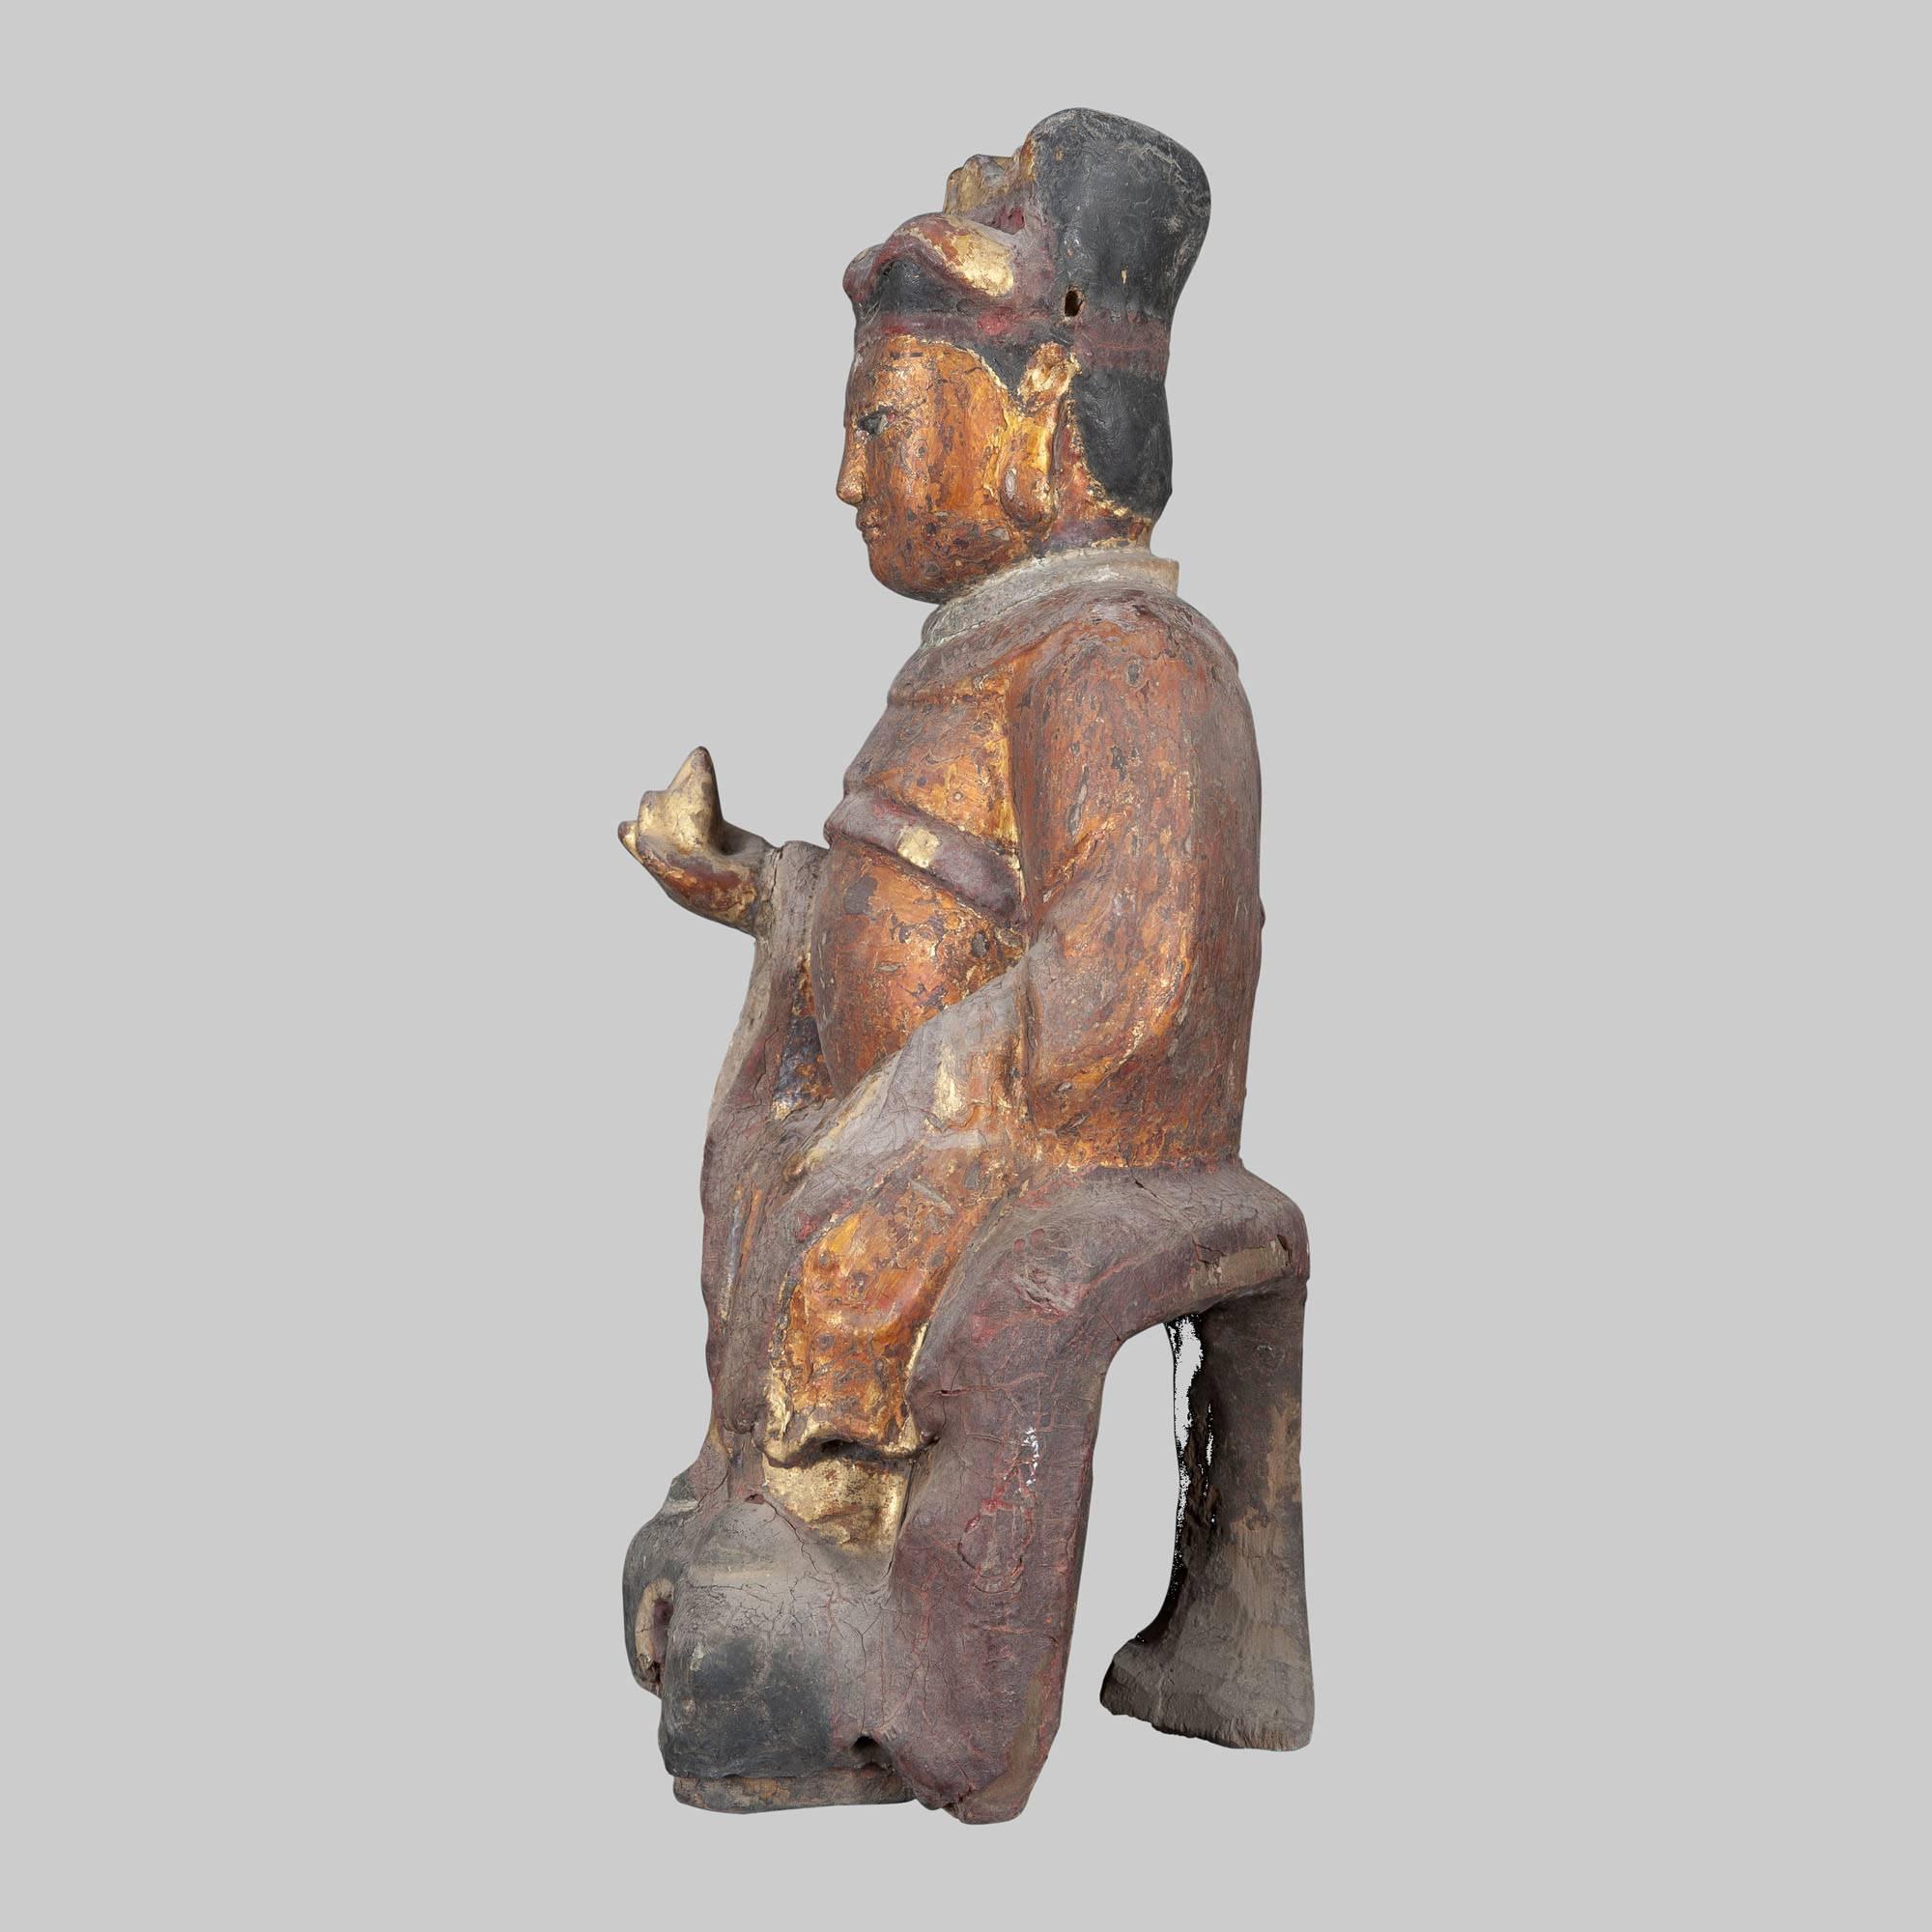 Ancient Chinese sculpture in polychrome wood. The time didn't affect the beauty of the work, and making the red color almost bronzed. The red on the face in China symbolizes the sacredness of the person, so the sculpture depicts one of the many